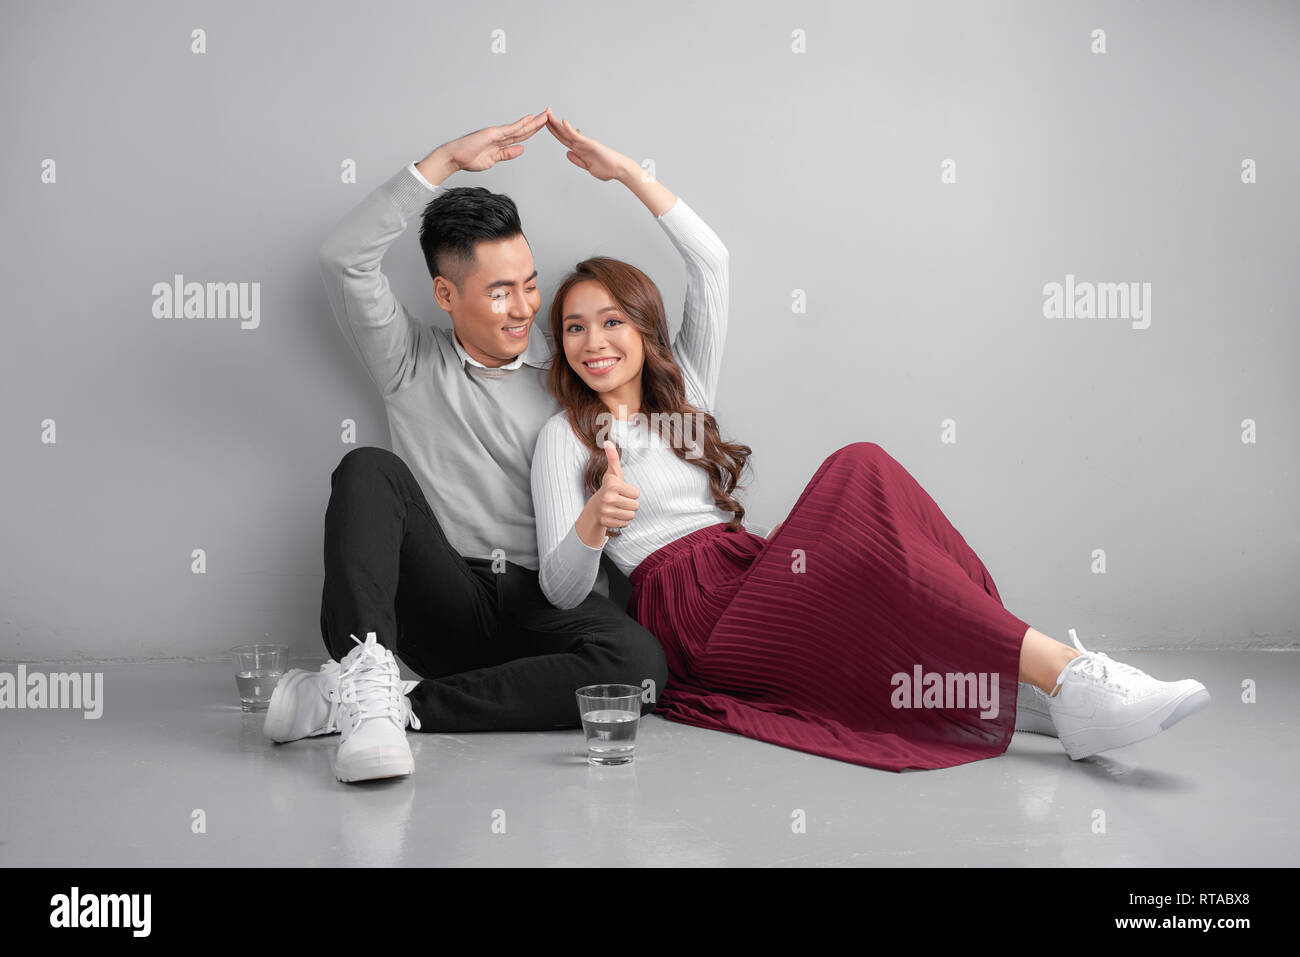 New building residential house purchase apartment concept. Stylish young family sitting on floor, wife and husband making roof figure with hands arms  Stock Photo